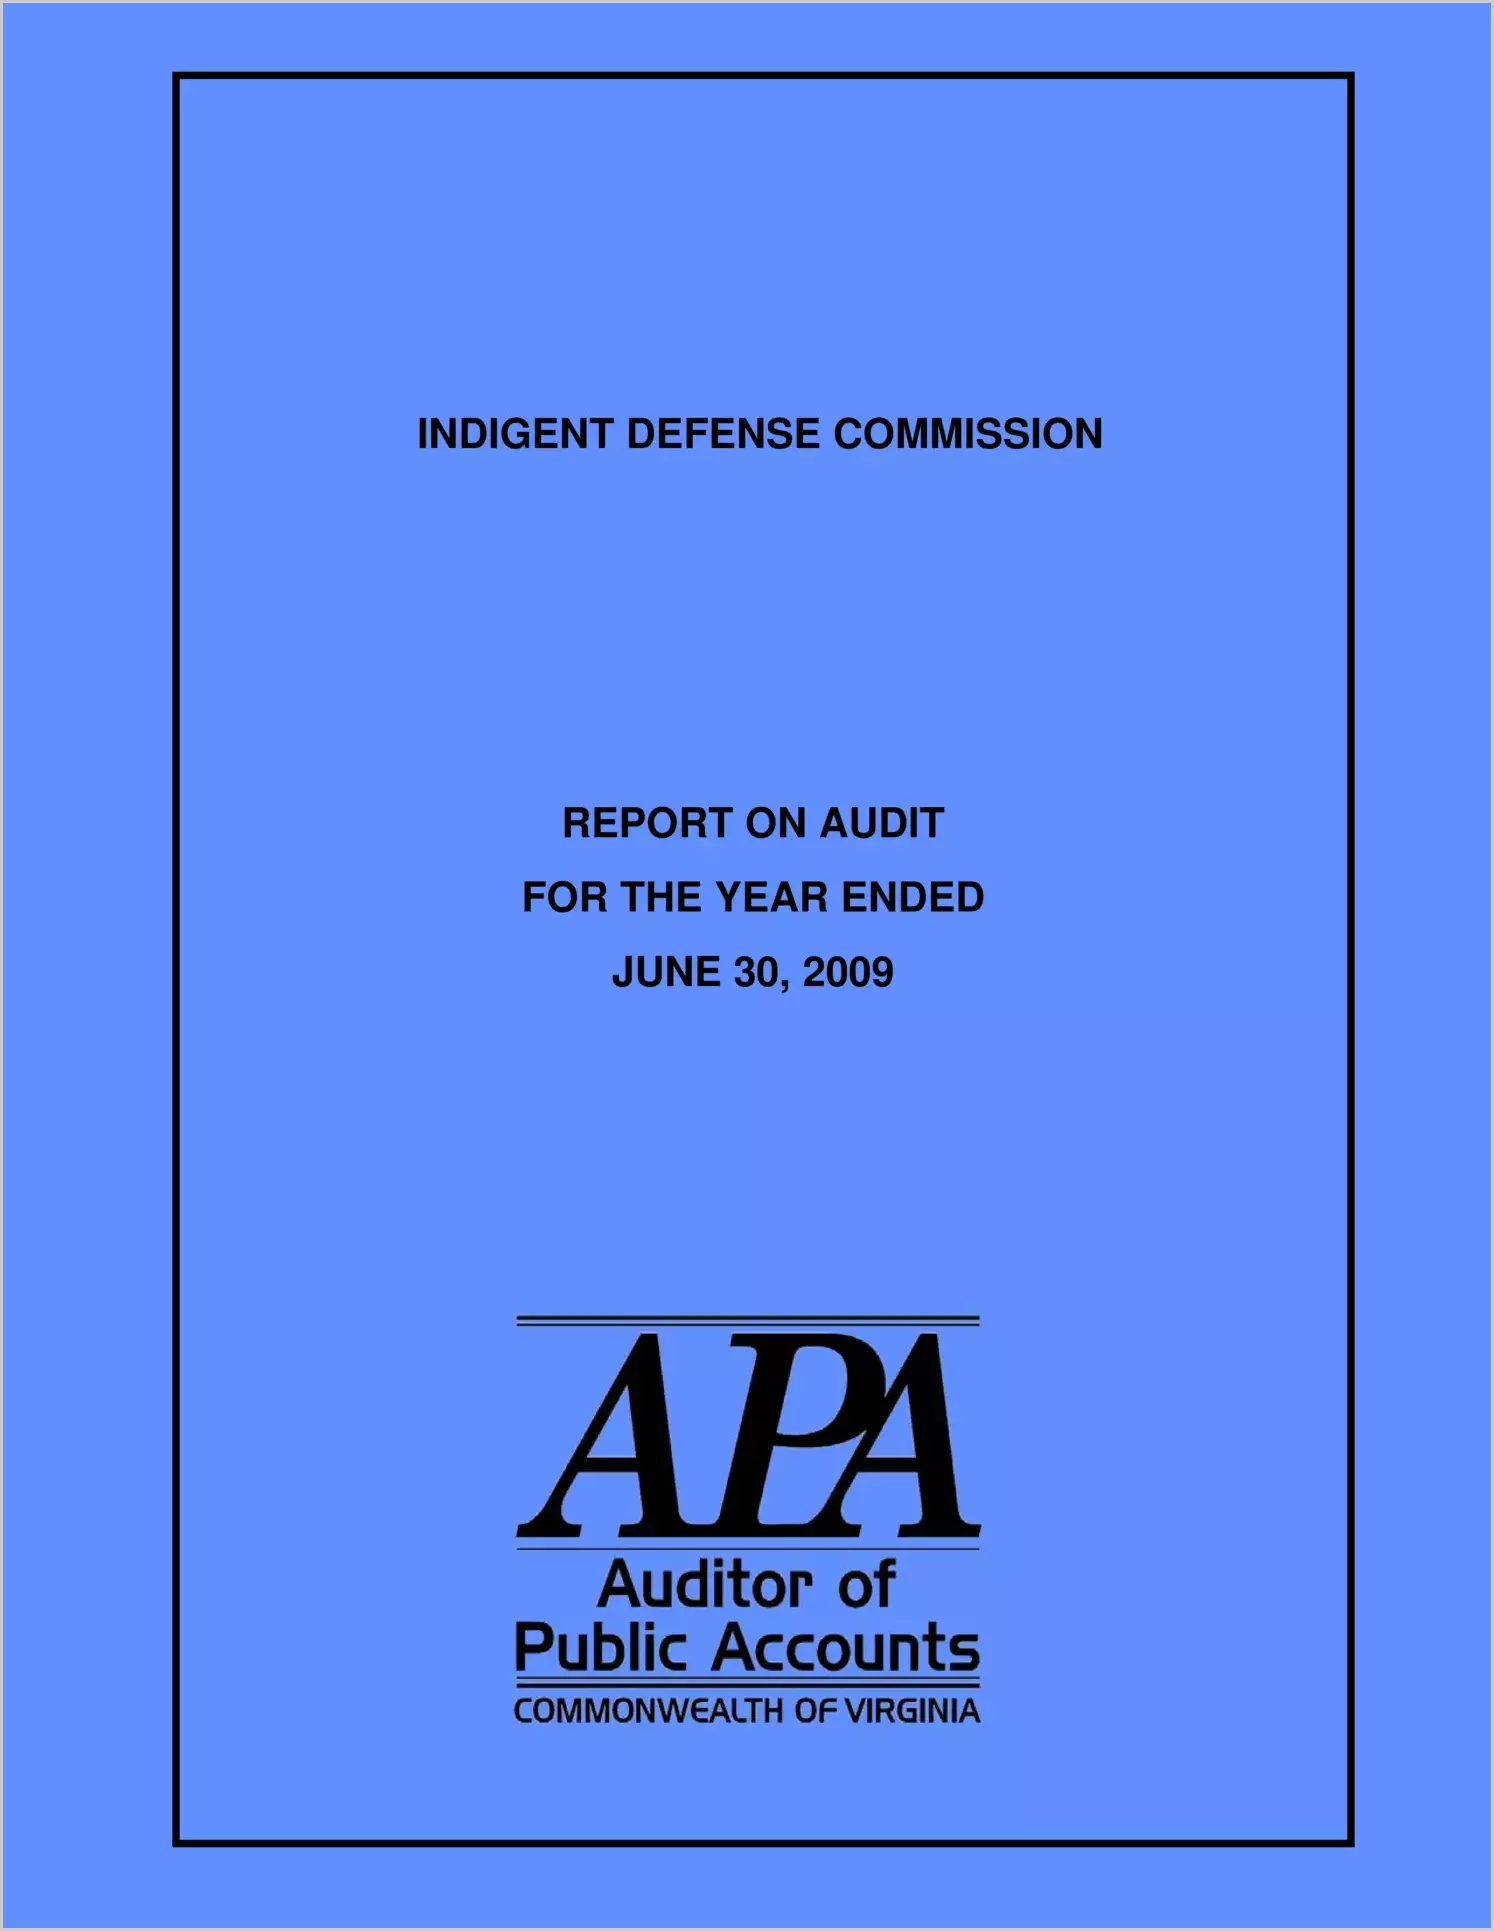 Indigent Defense Commission for the year ended June 30, 2009